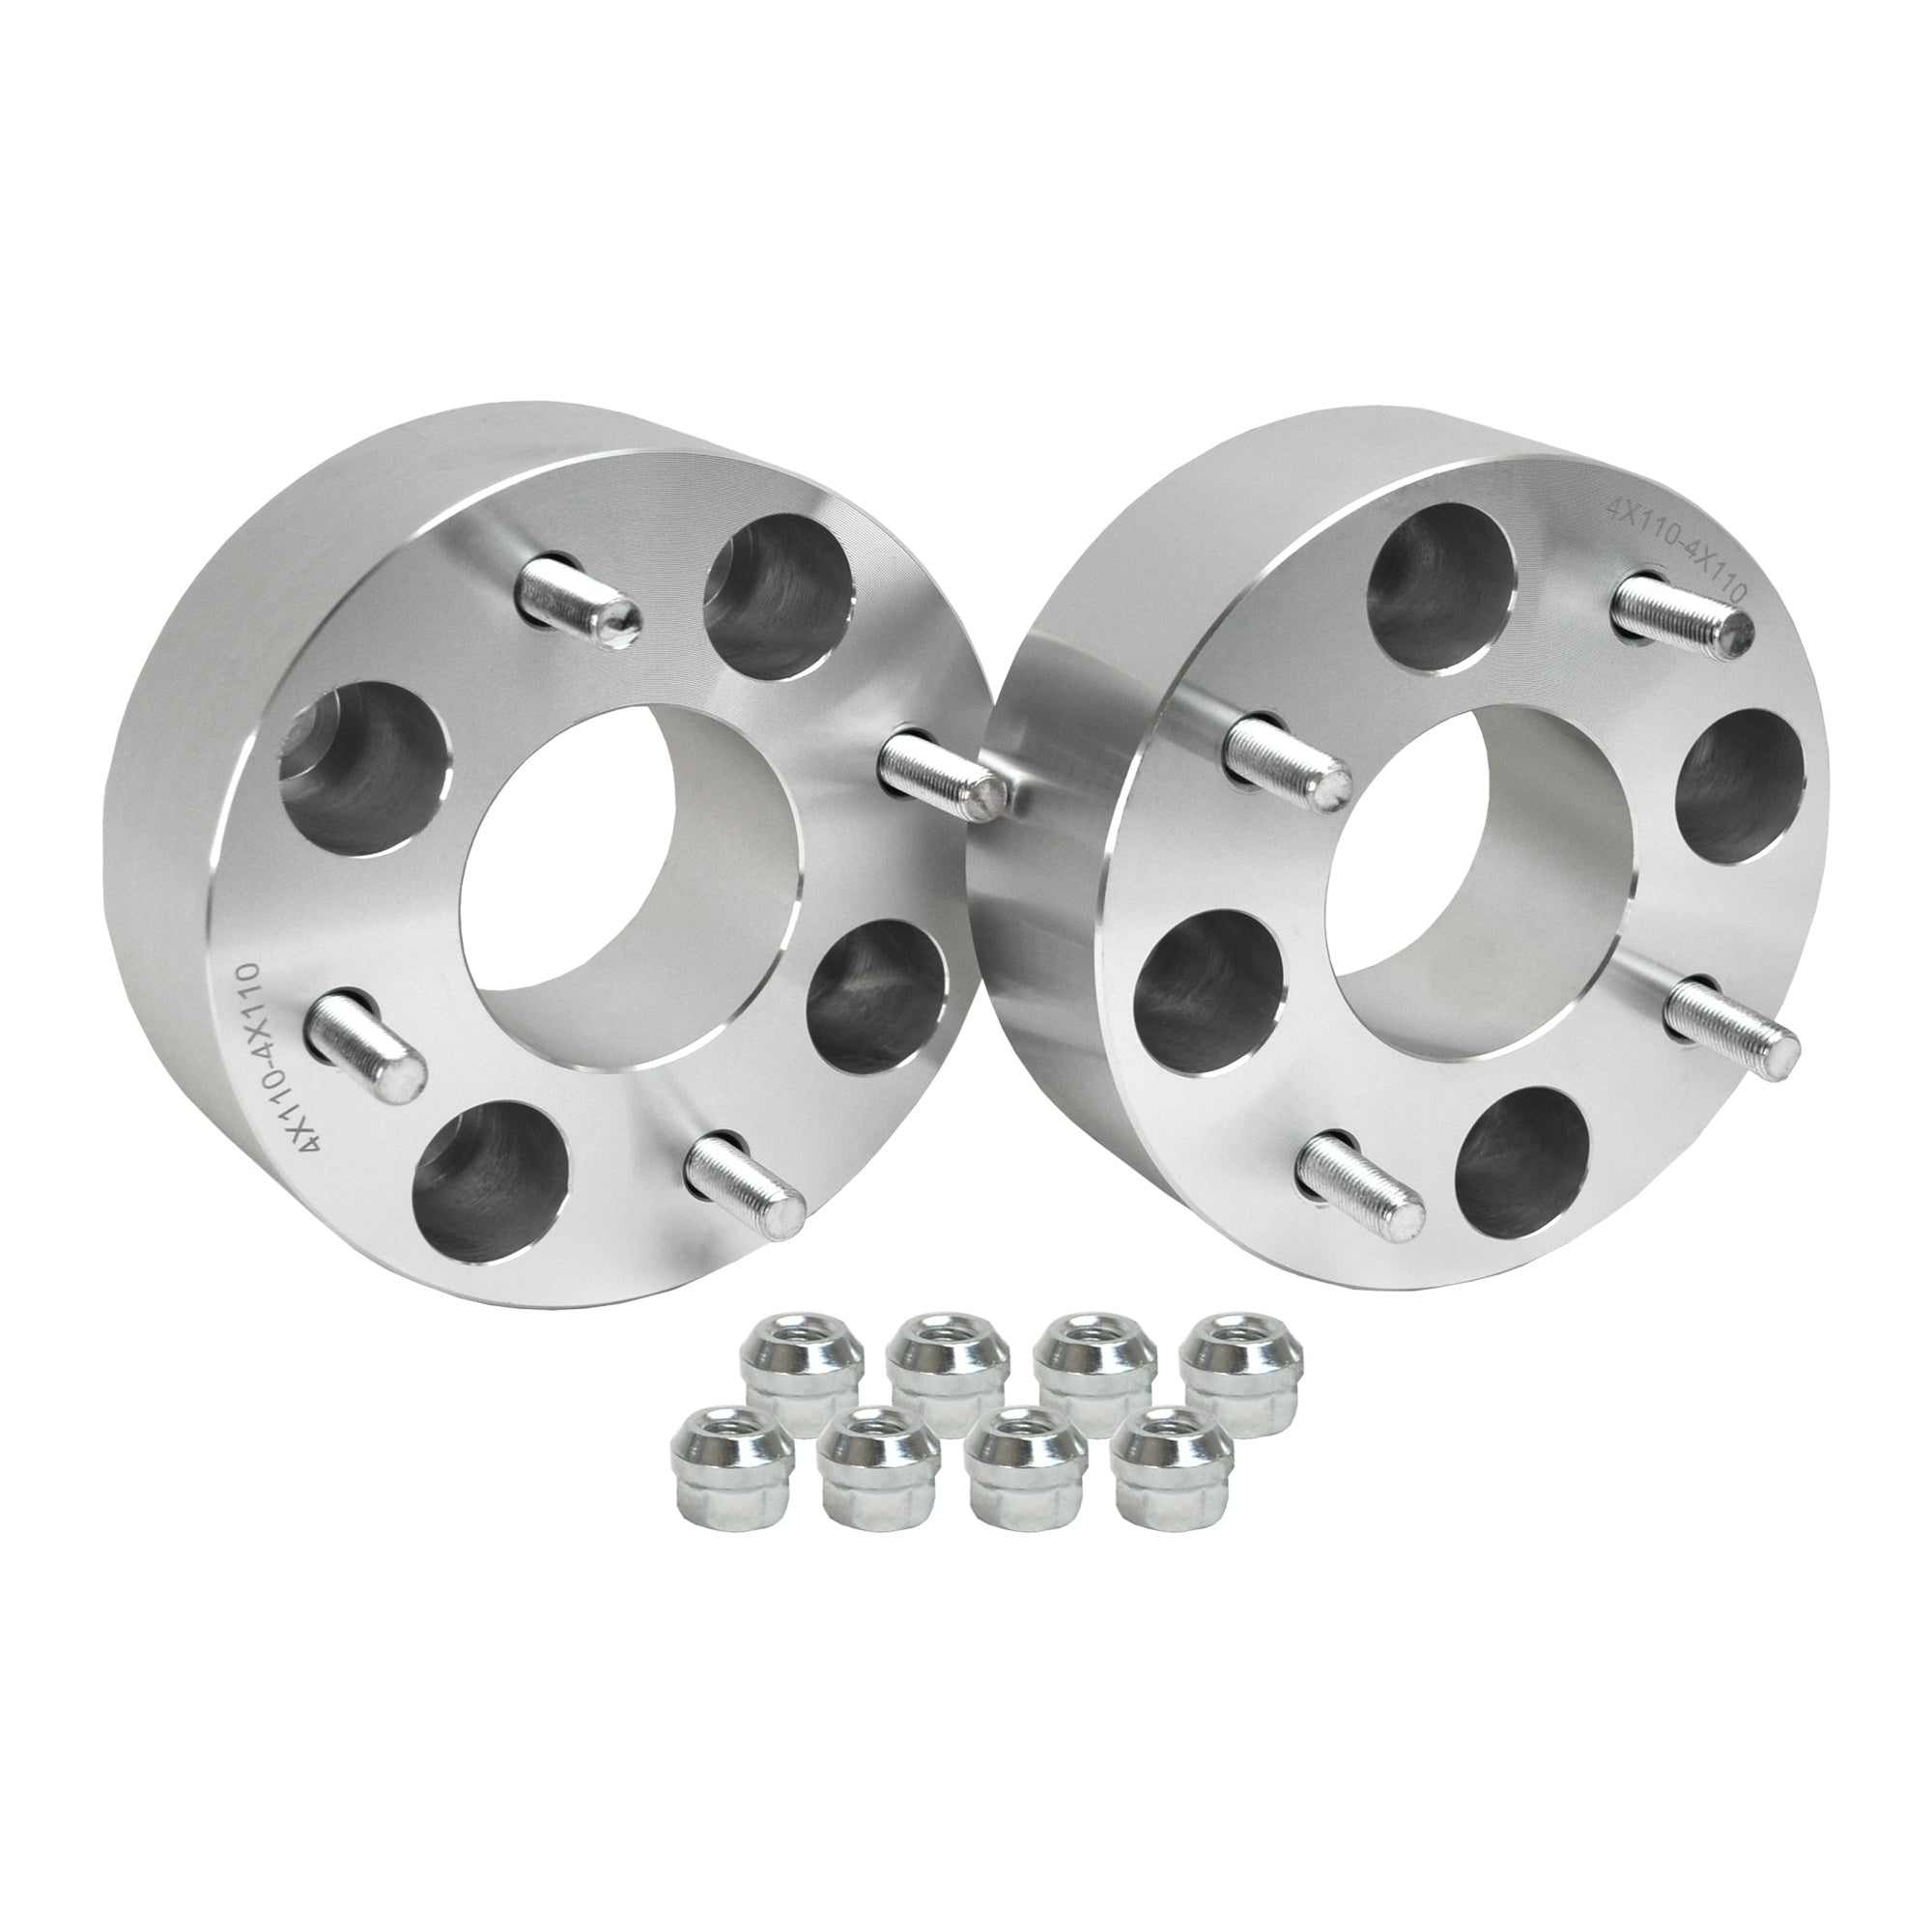 Yamaha Grizzly 450 Demon Wheel Spacer